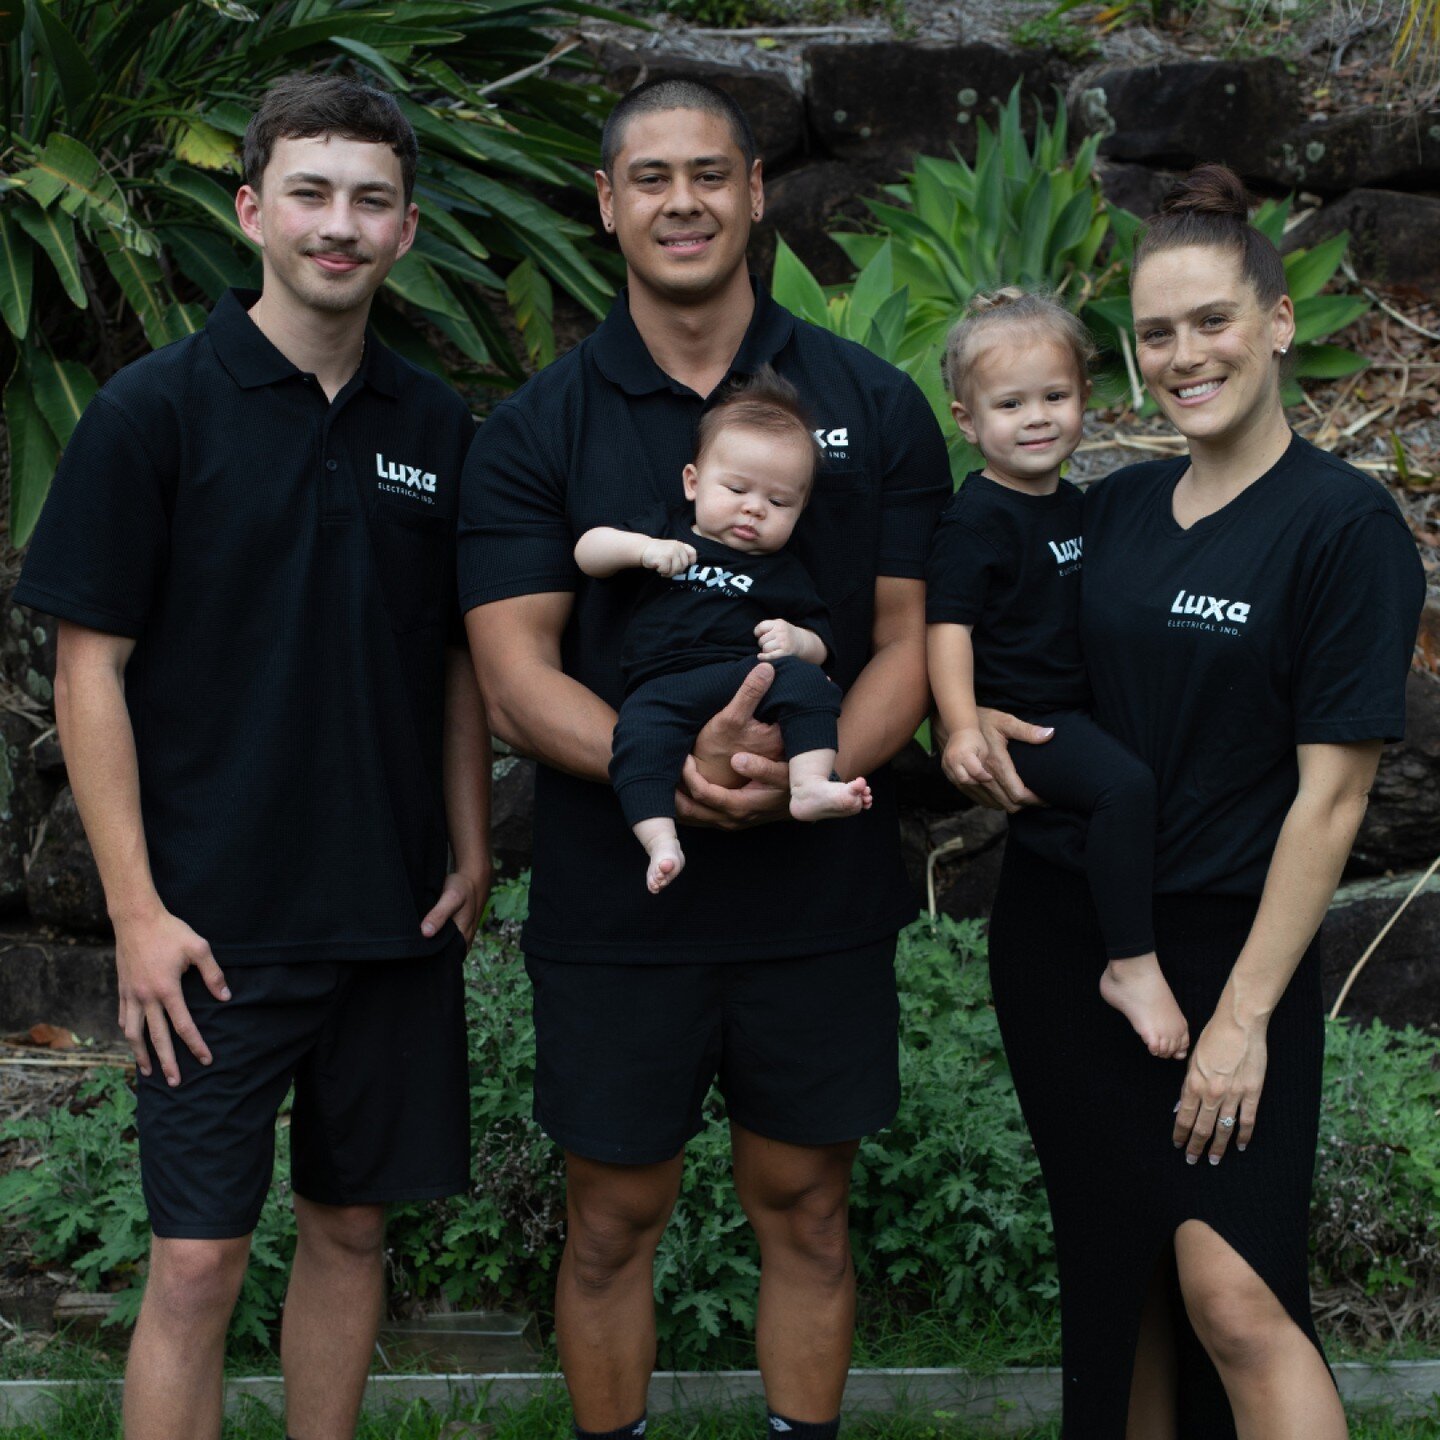 Meet the LUXE Family - based in Buderim 💡

&quot;Live the brighter life&quot; 

#electrical #electrician #electriciansunshinecoast #electricianbrisbane #luxeelectrical #luxe #luxeelectricalindustries #residential #commercial #power #newbuilds #trade